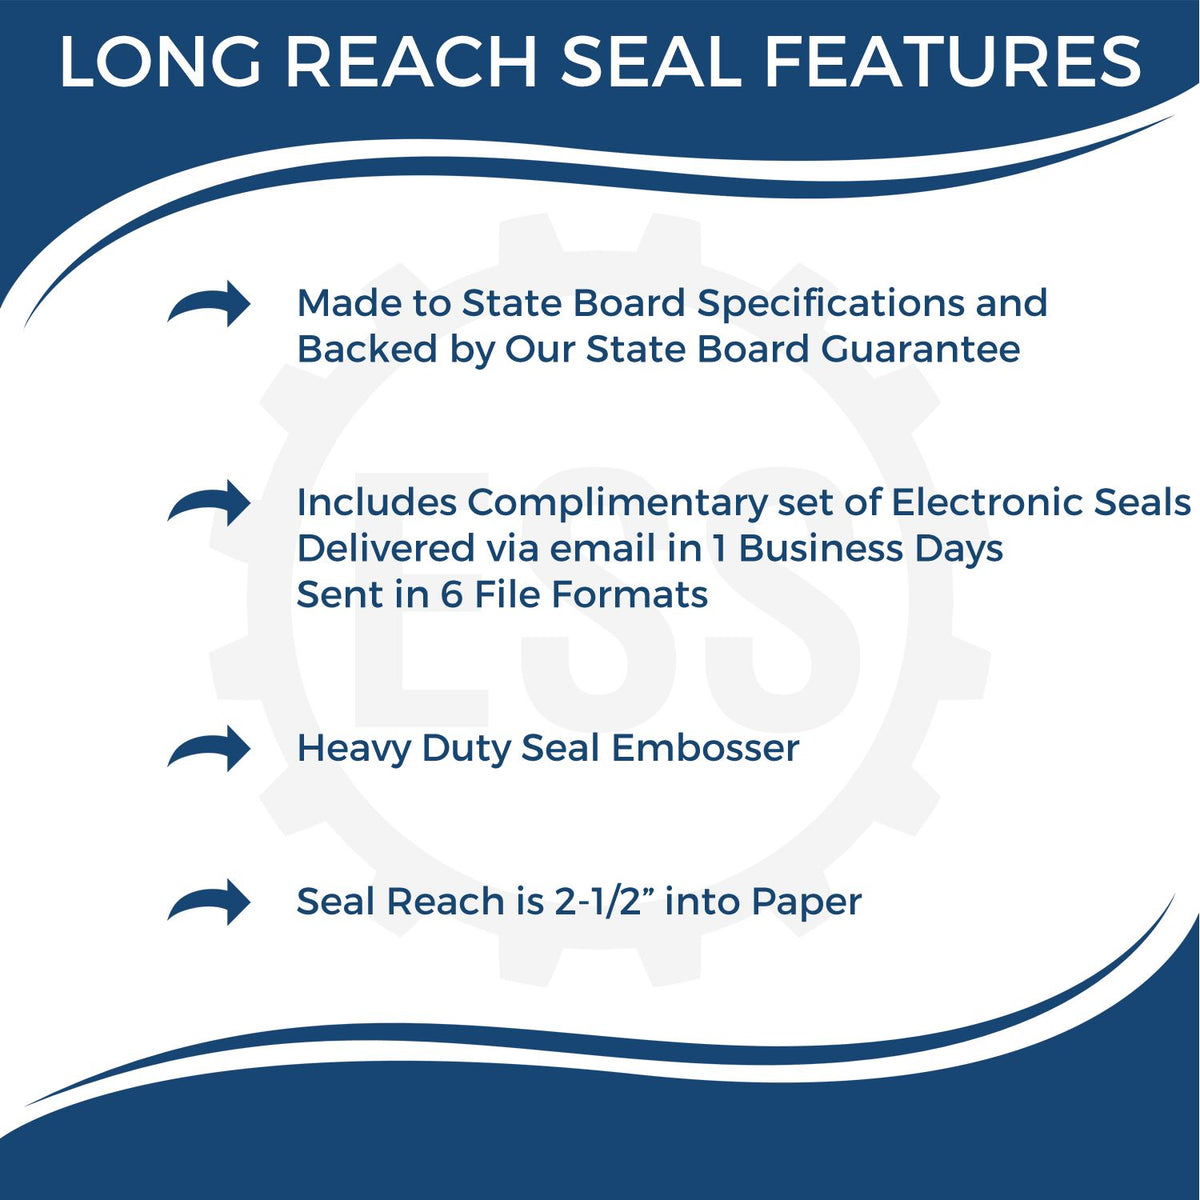 A picture of an infographic highlighting the selling points for the Long Reach Alaska Land Surveyor Seal